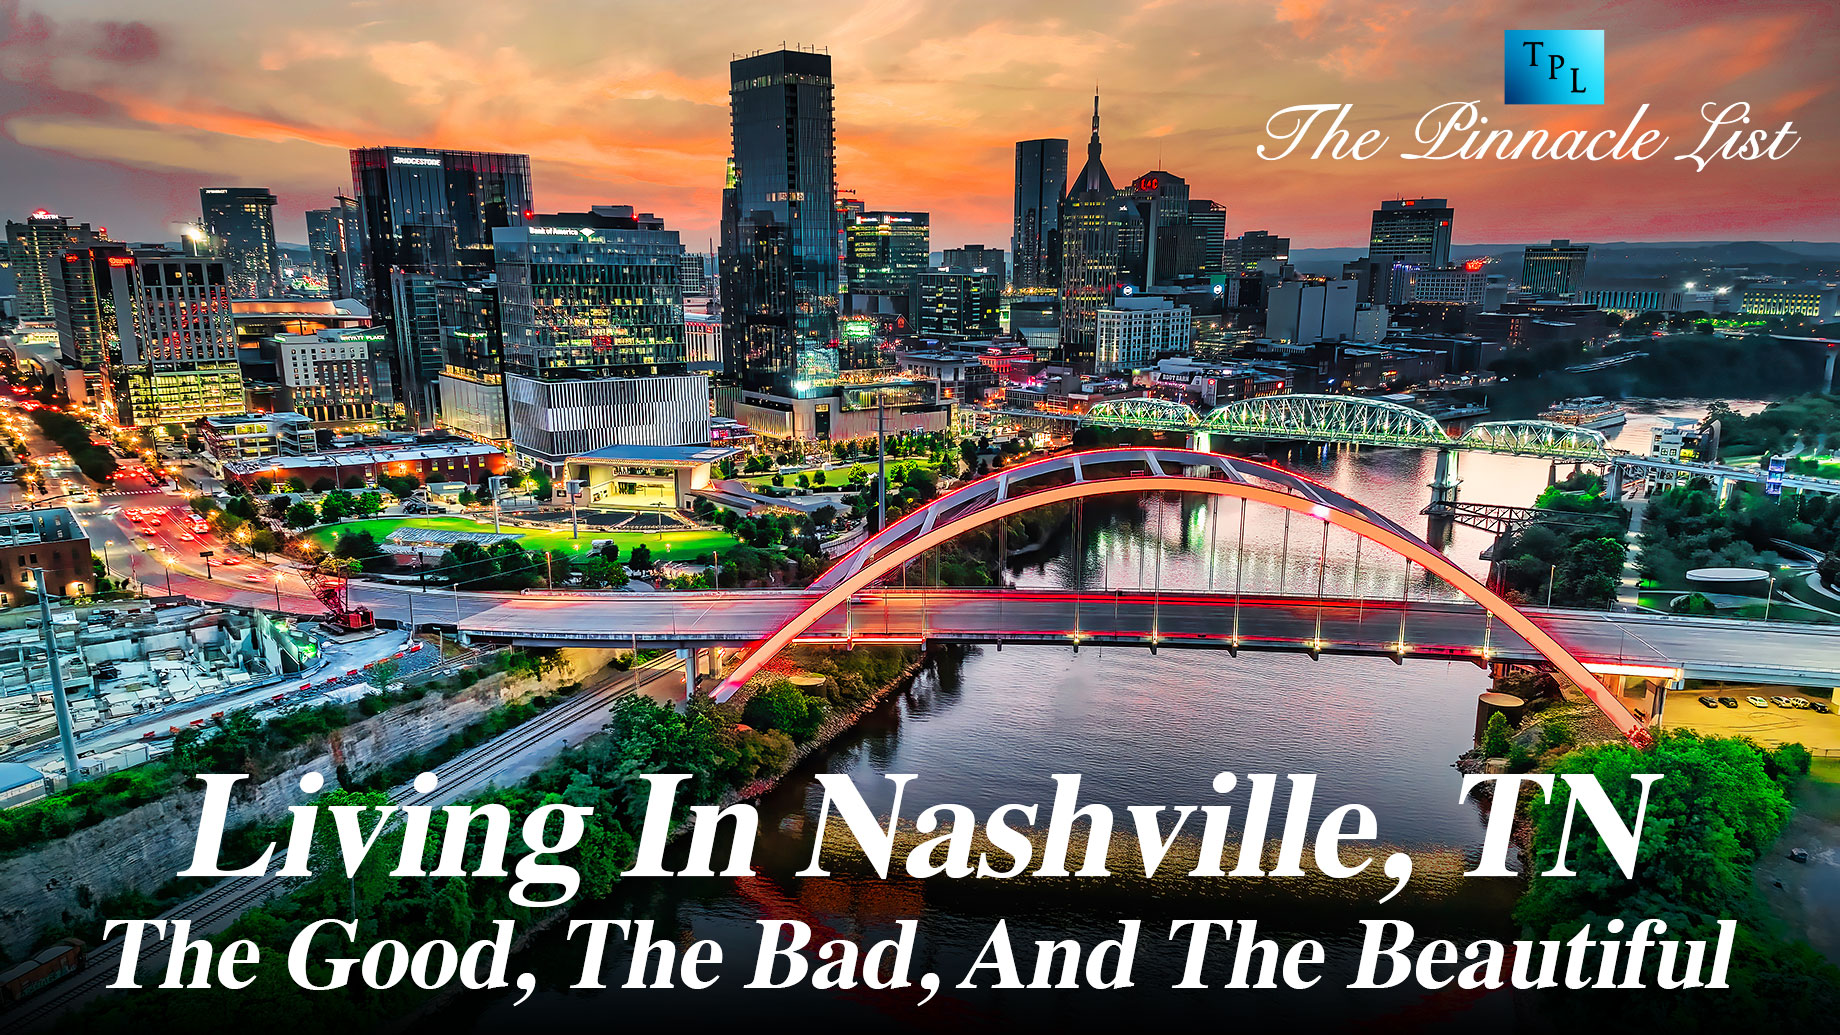 Living In Nashville, TN: The Good, The Bad, And The Beautiful